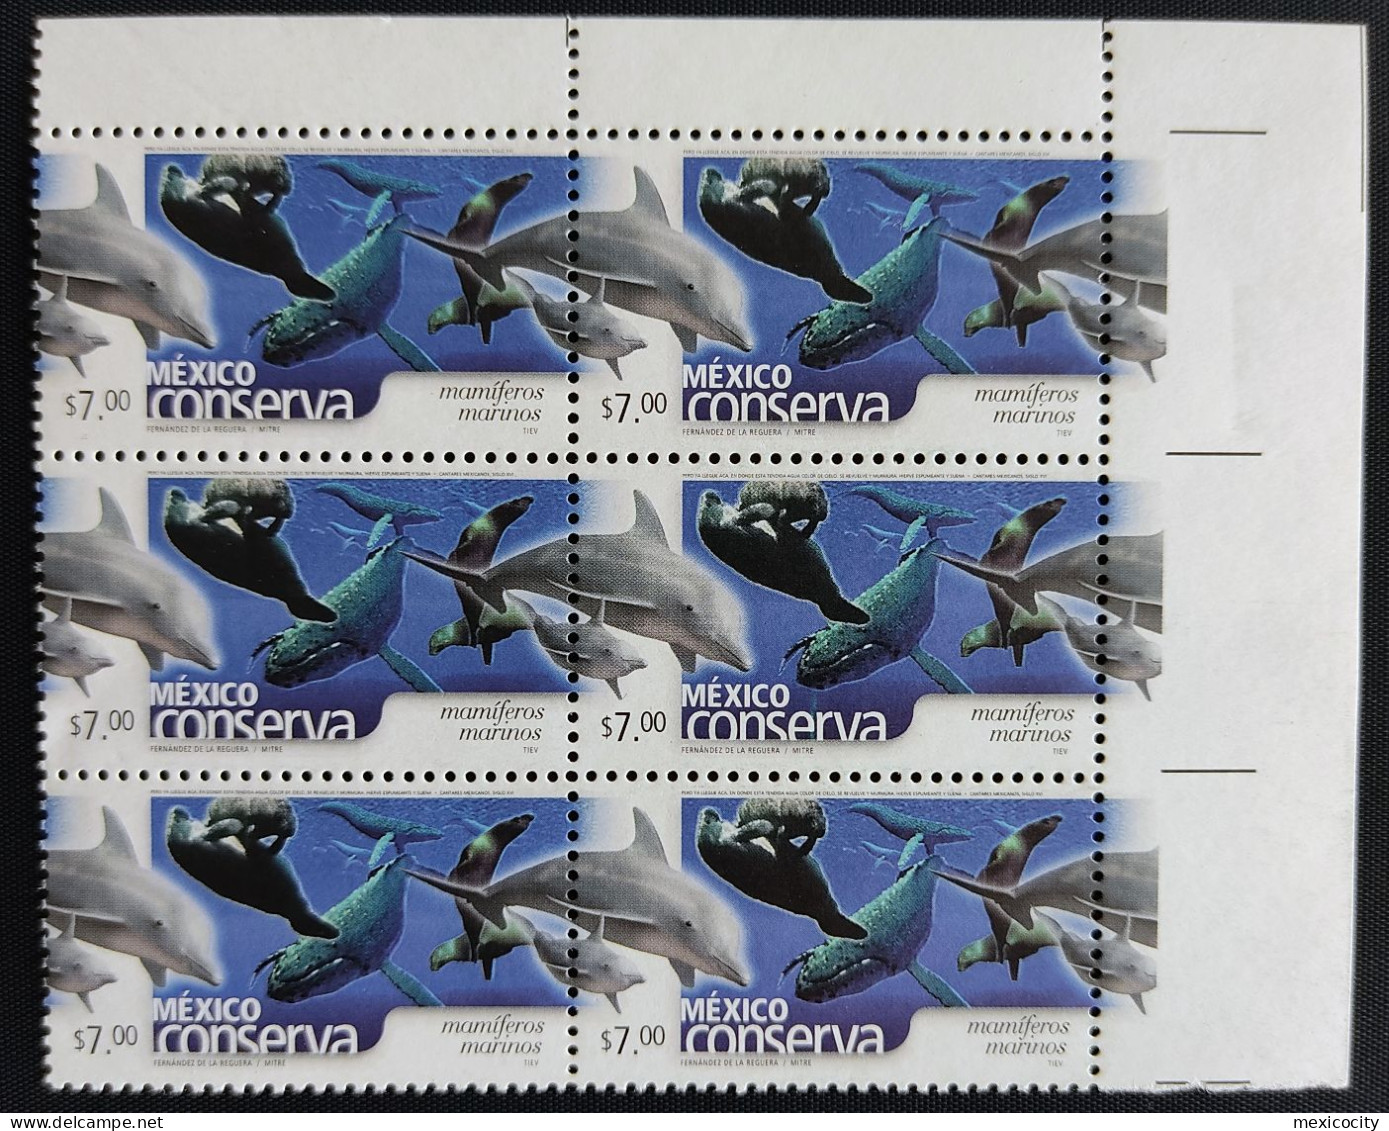 MEXICO 2005 $7 SEA MAMMALS Blk. 6, One With Blue Line Below Whale Flaw, Rare Ptg. Var. MNH Unm. - Messico